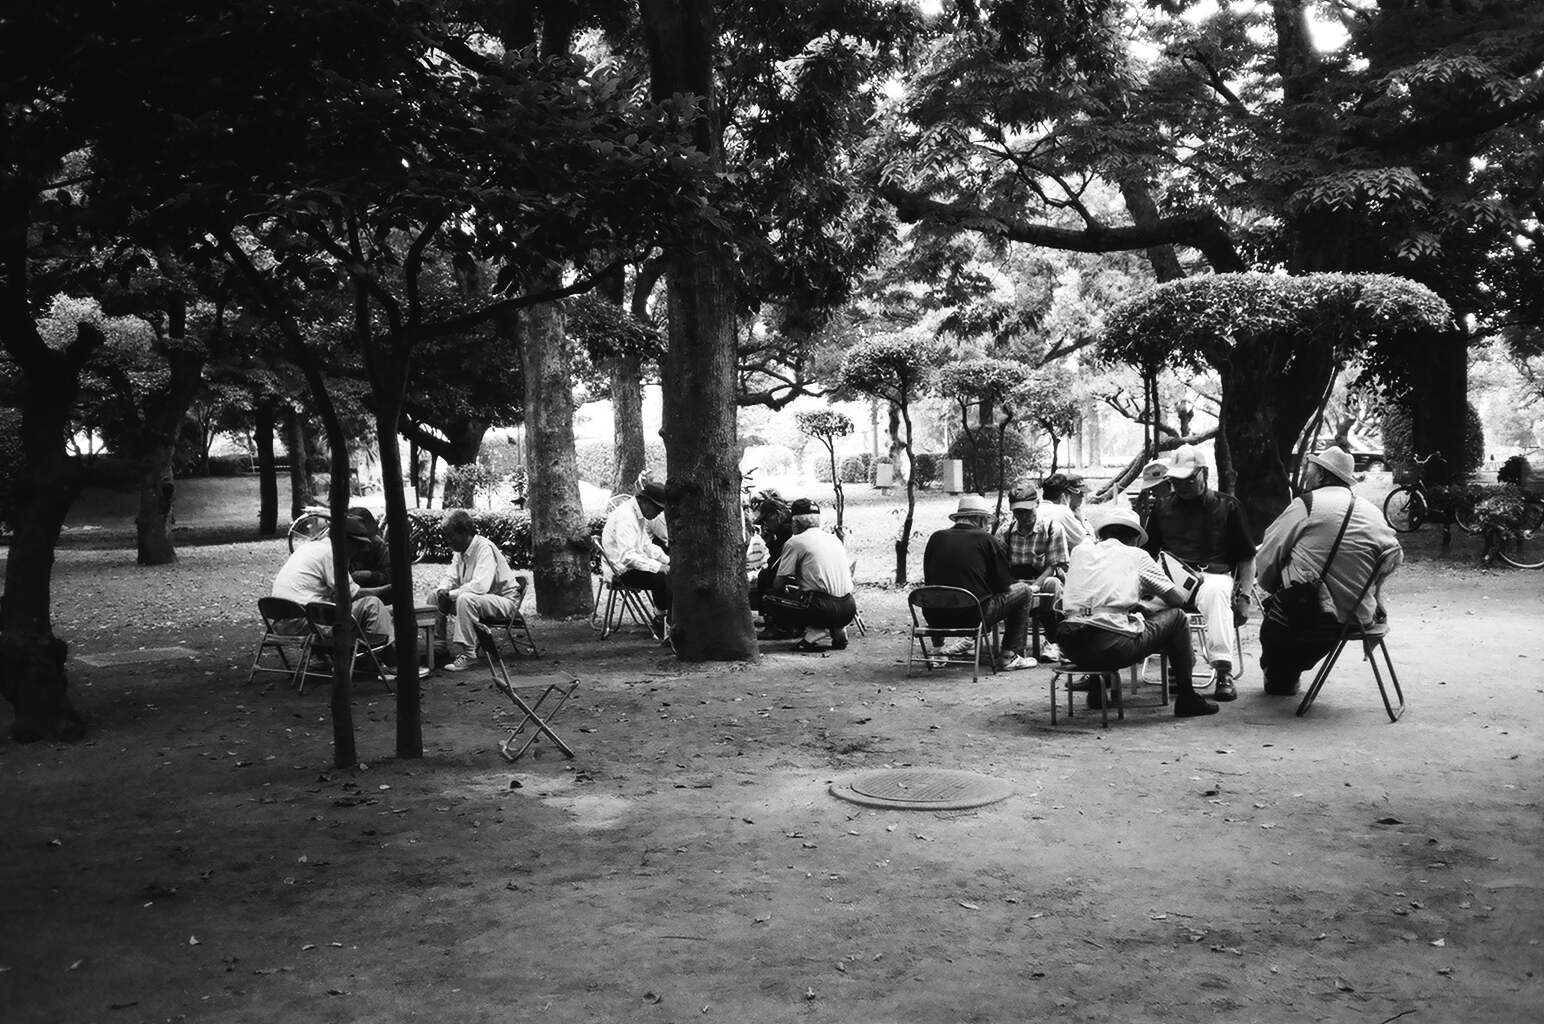  Elderly locals play chess in the park. 